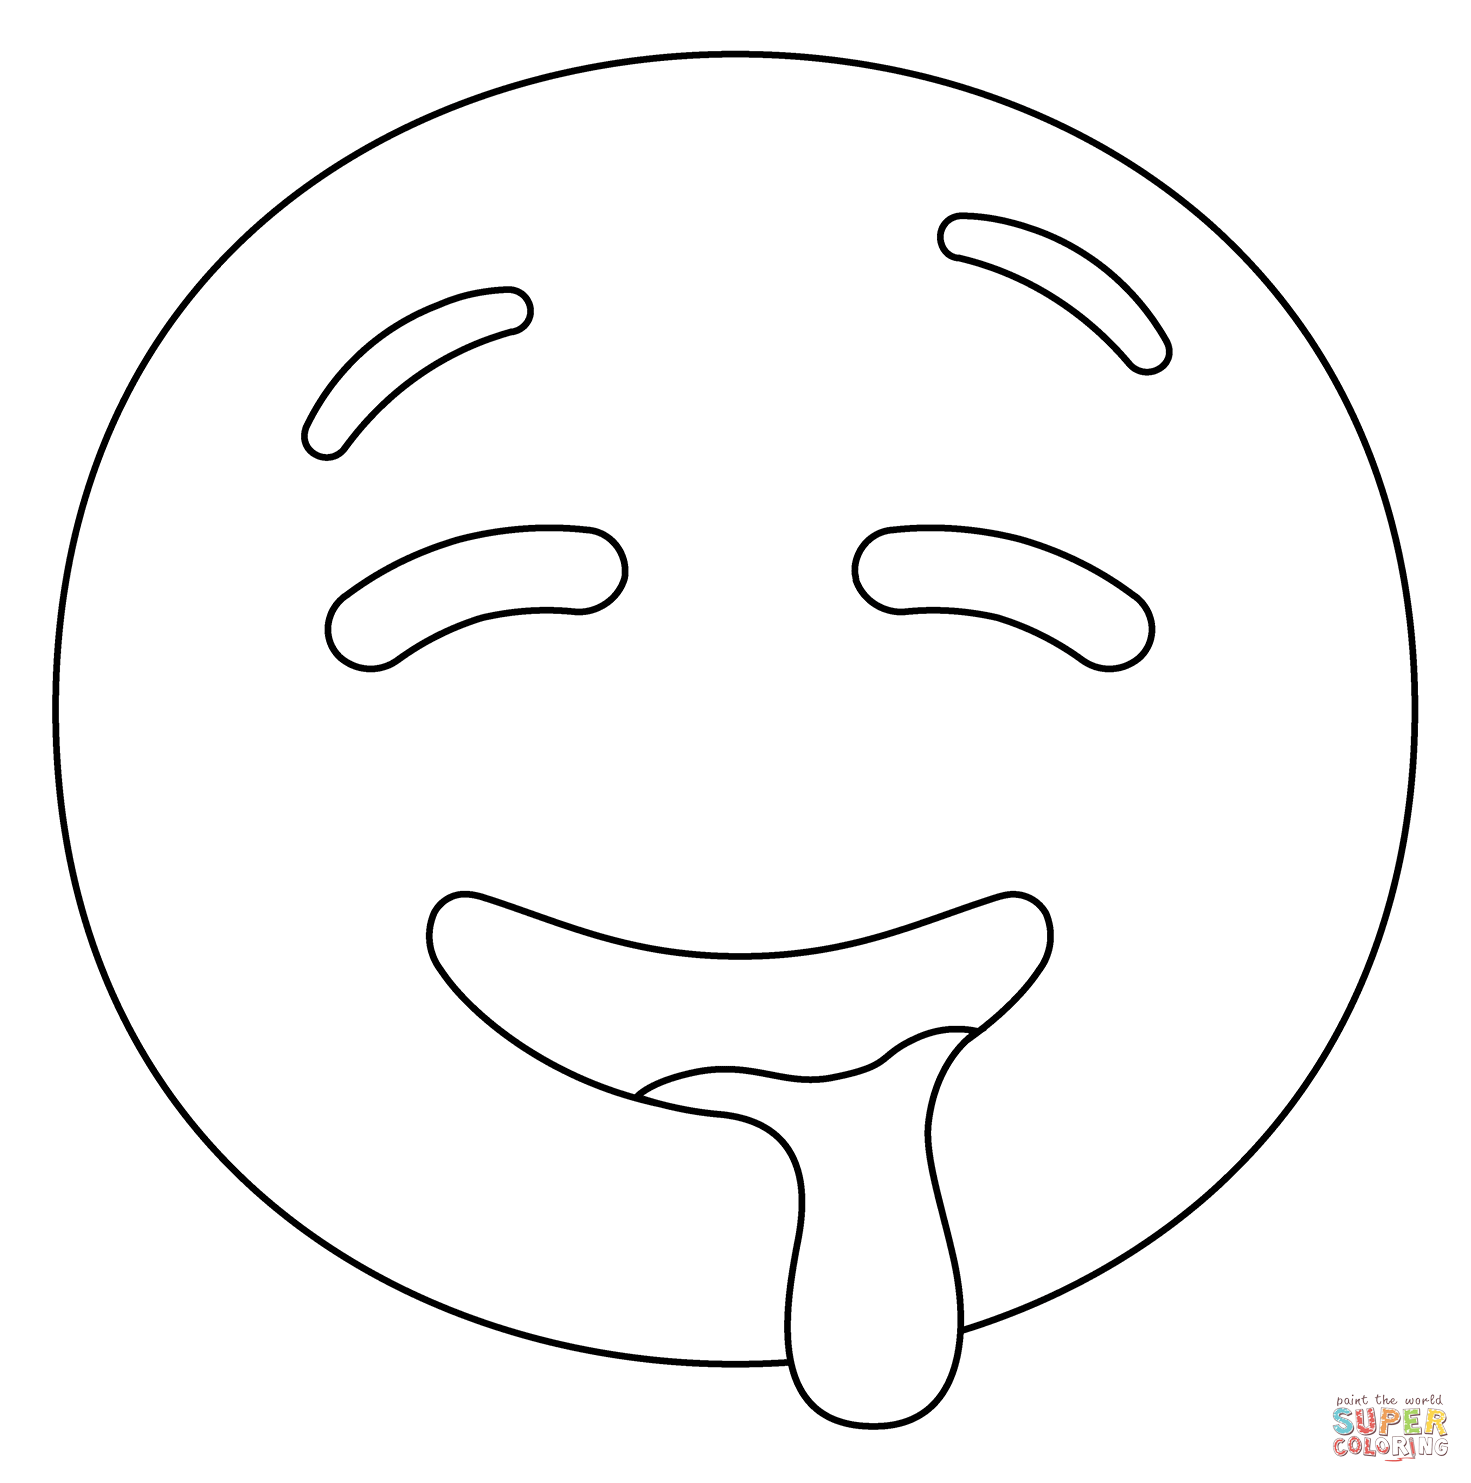 Drooling face emoji coloring page free printable coloring pages